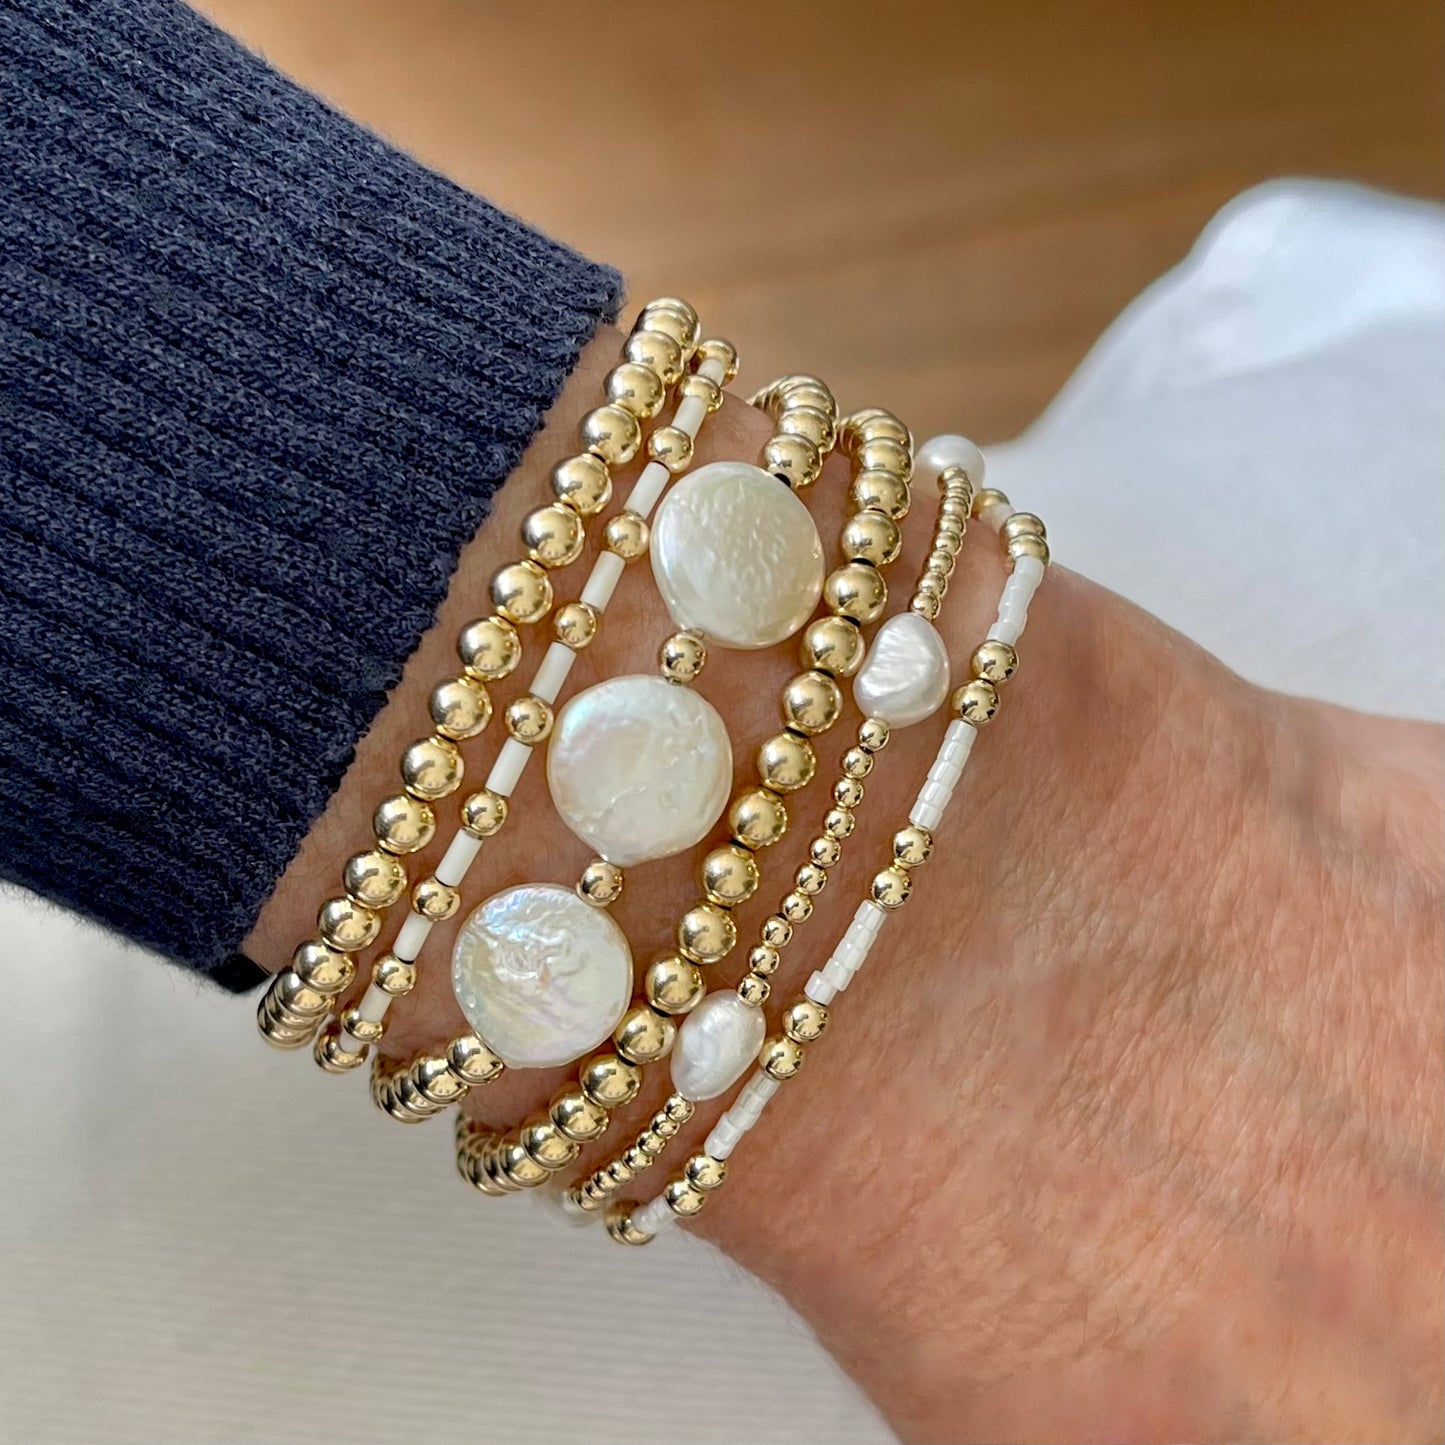 White pearl and gold bracelet stack of 6 with freshwater coin and rice pearls, glass seed beads, and 14K gold filled waterproof beads on elastic.